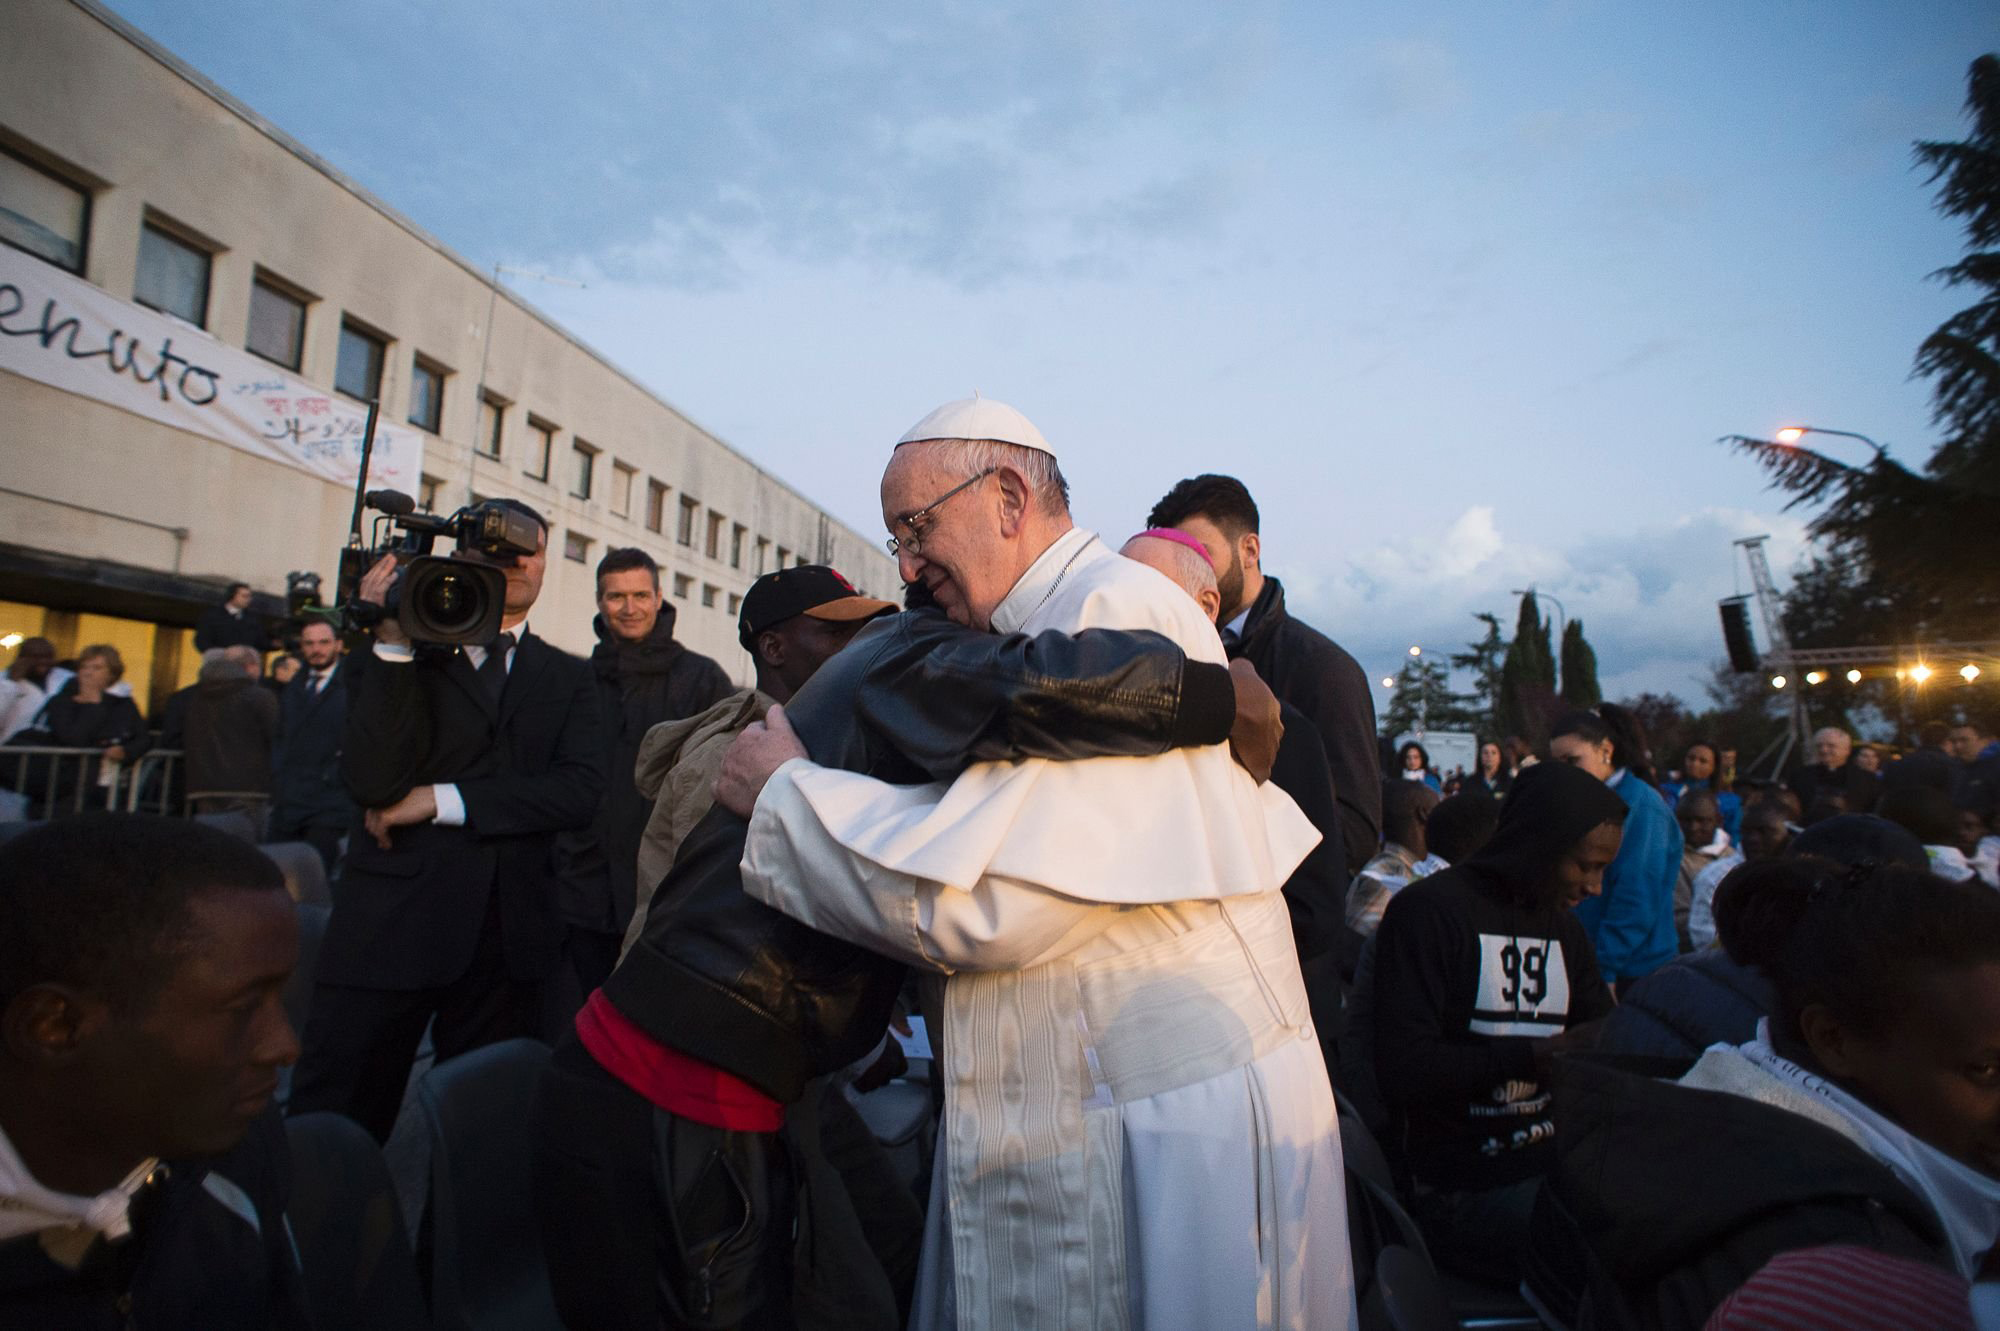 Pope Francis at the Castelnuovo di Porto refugees center near Rome, Italy on March 24, 2016.